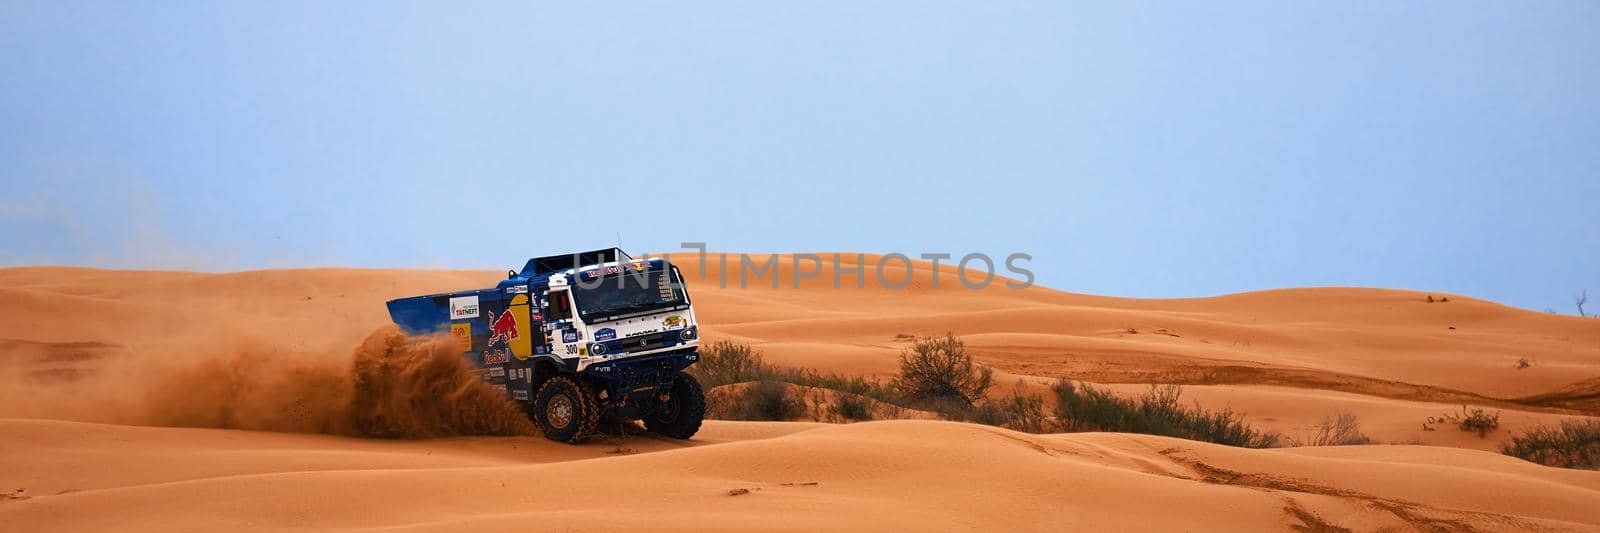 Sports truck KAMAZ gets over the difficult part of the route during the Rally raid in sand. THE GOLD OF KAGAN-2021. 26.04.2021 Astrakhan, Russia by EvgeniyQW